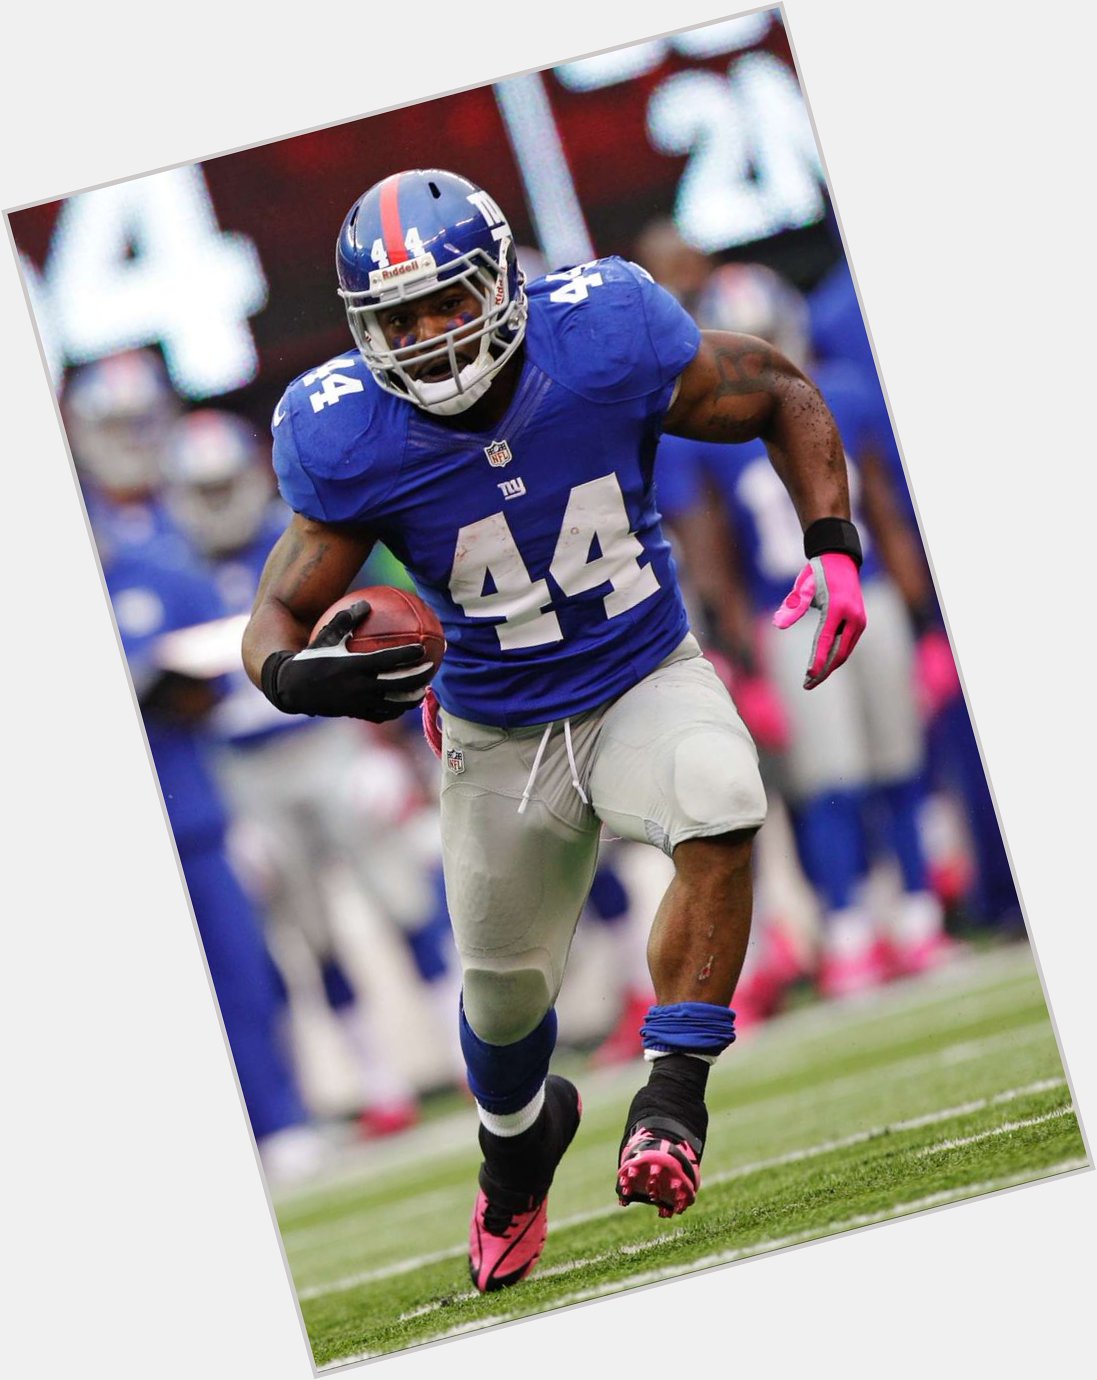 Happy 29th birthday to the one and only Ahmad Bradshaw! Congratulations 